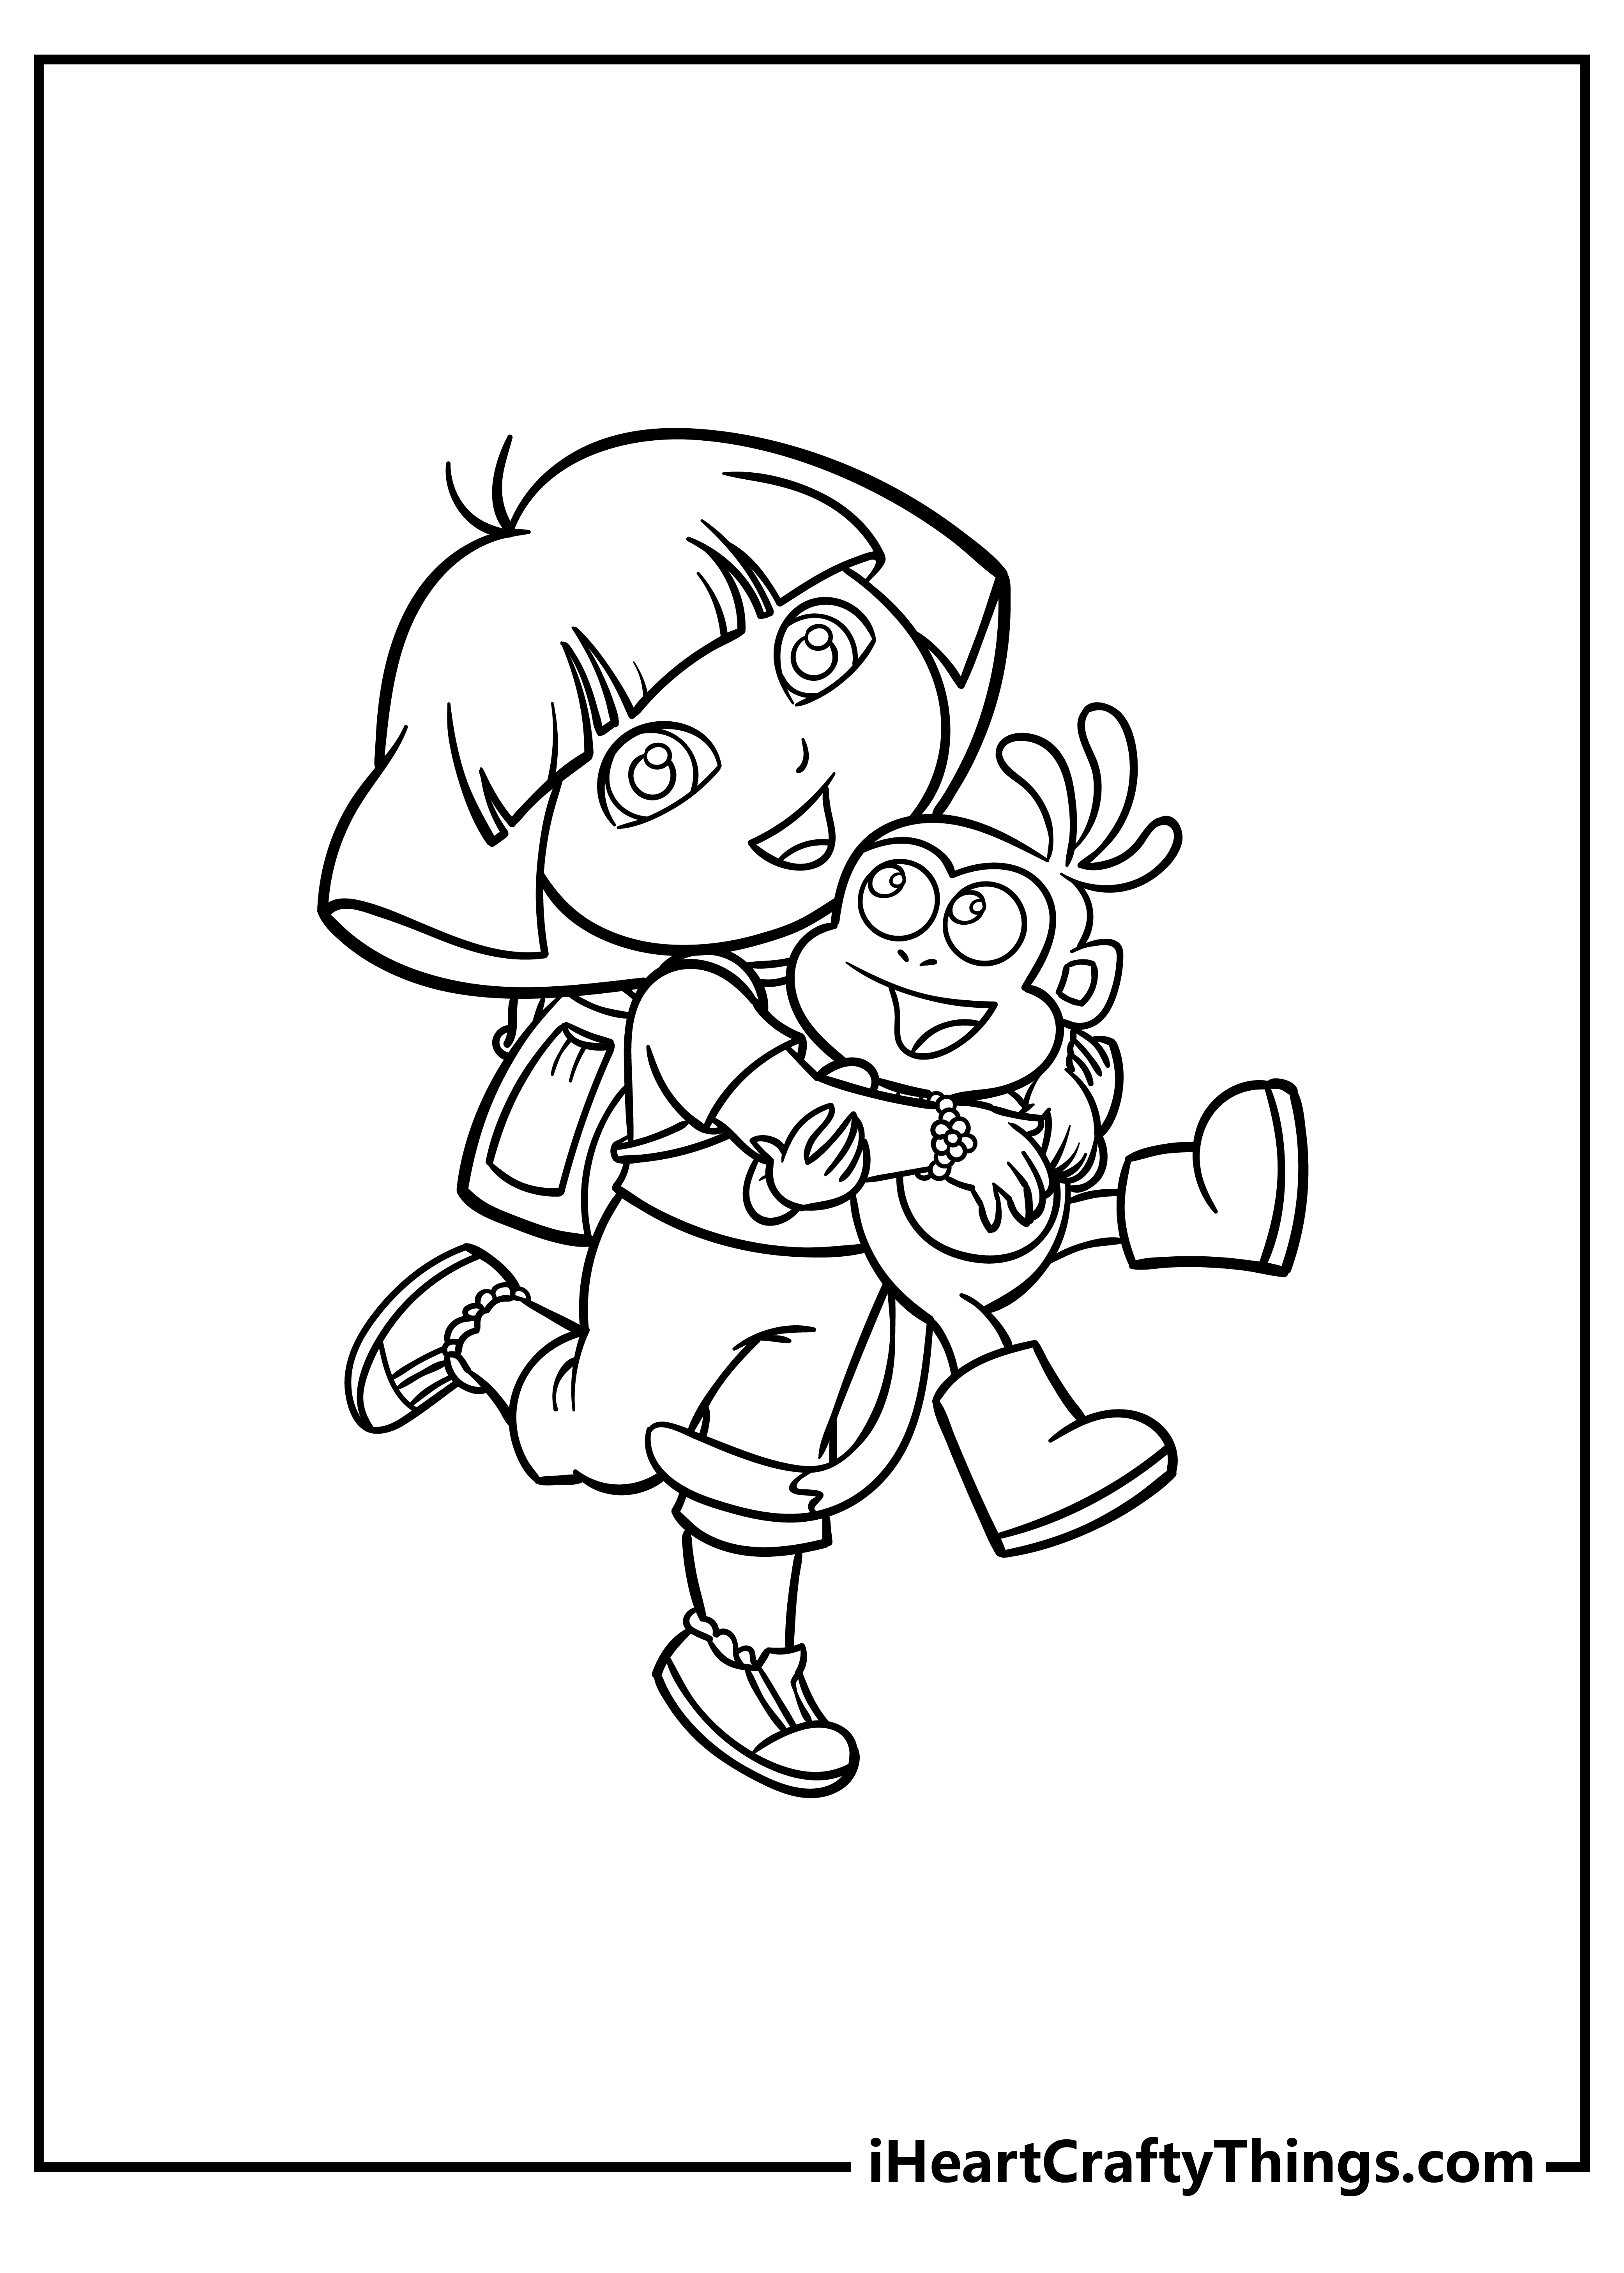 Dora coloring pages free printables